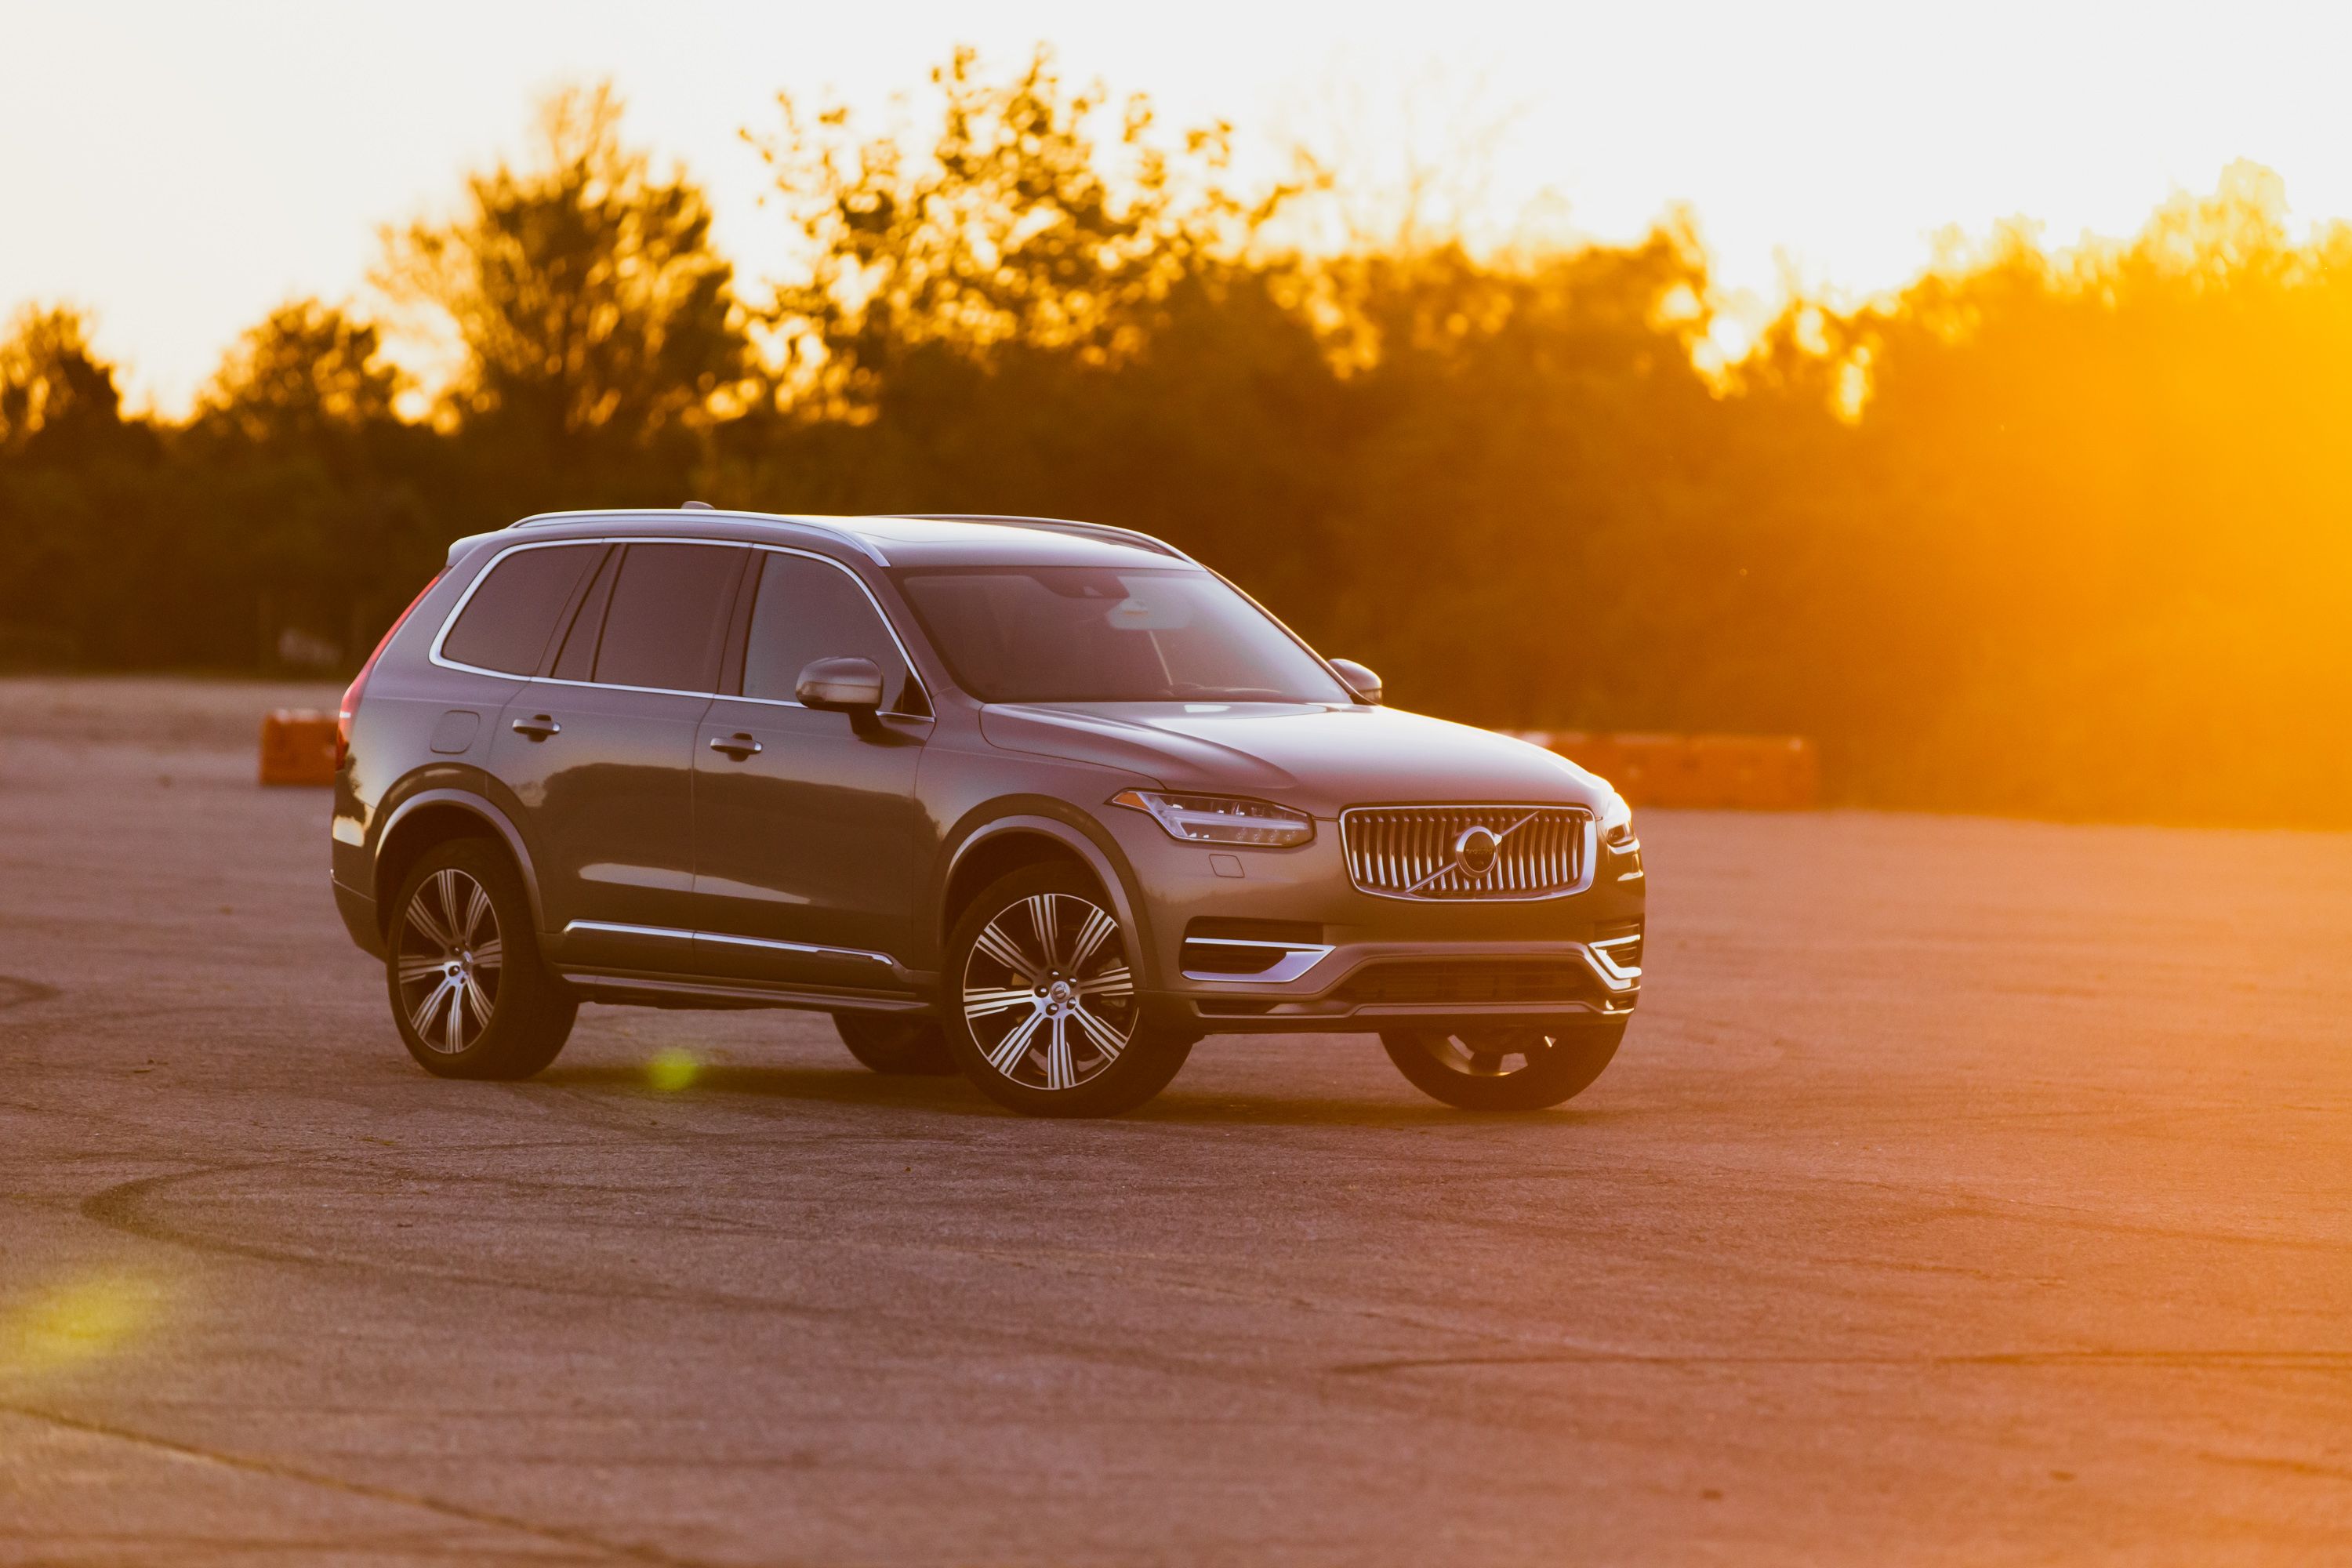 2020 XC90 Represents A Problem For Volvo